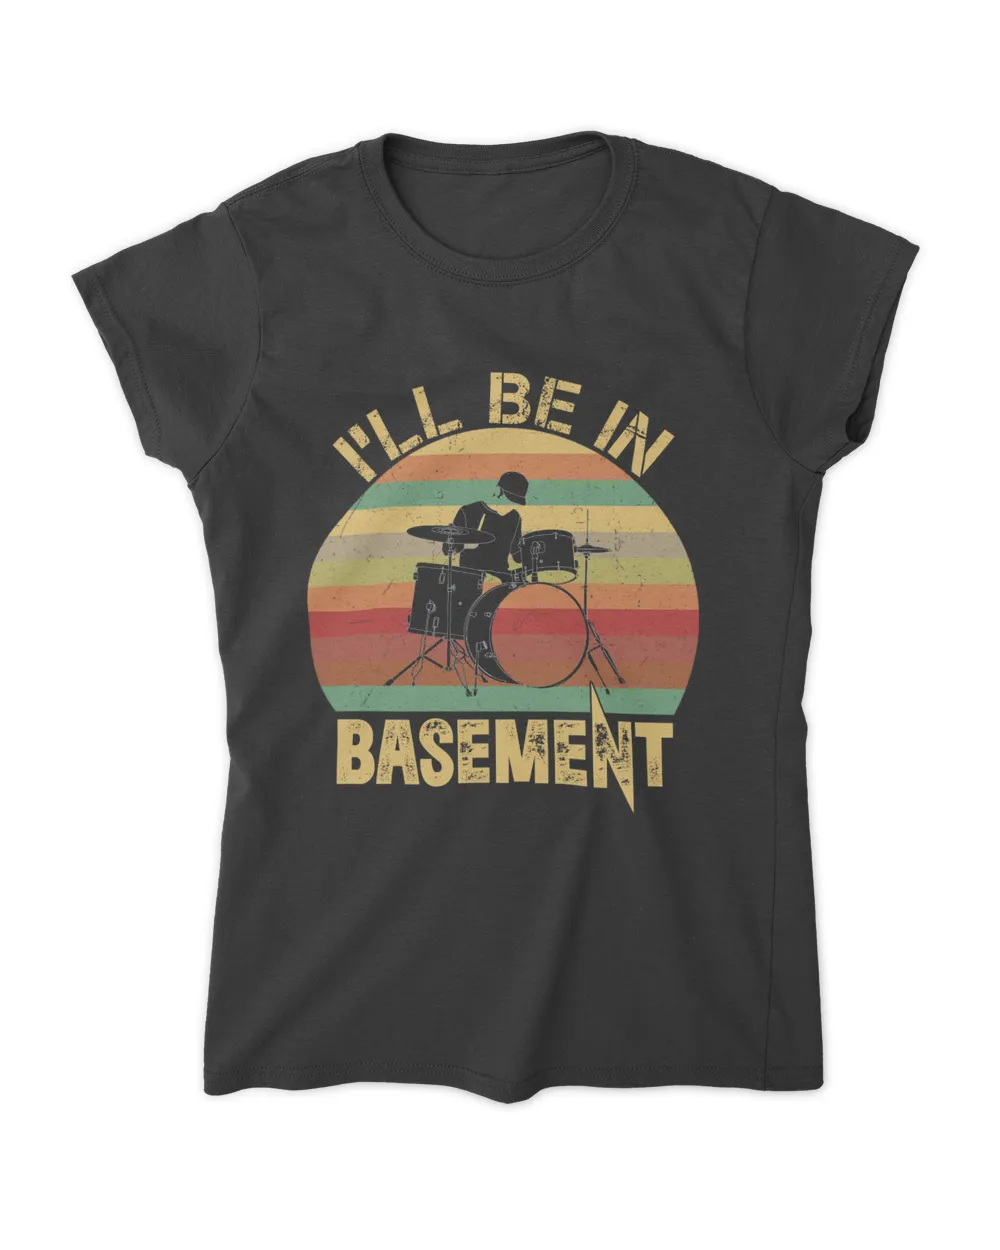 RD I'll Be In Basement Drum Set Drumming Drummer T-Shirt, Drummer Shirt, Drum Sticks Shirt,Drum Band Shirt,Drum Shirt,Gift For Drummer